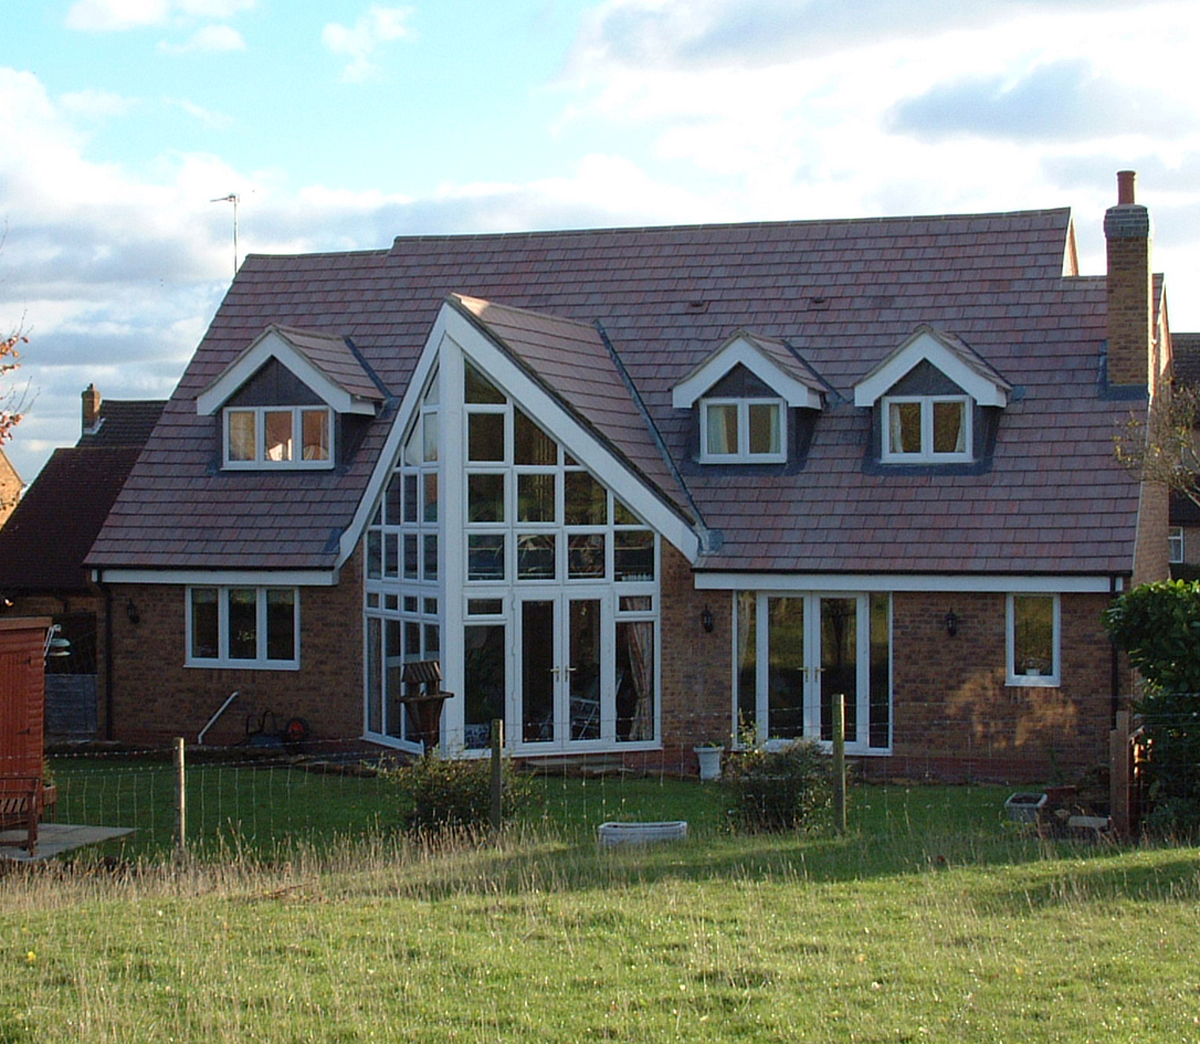 Modern new build detached home